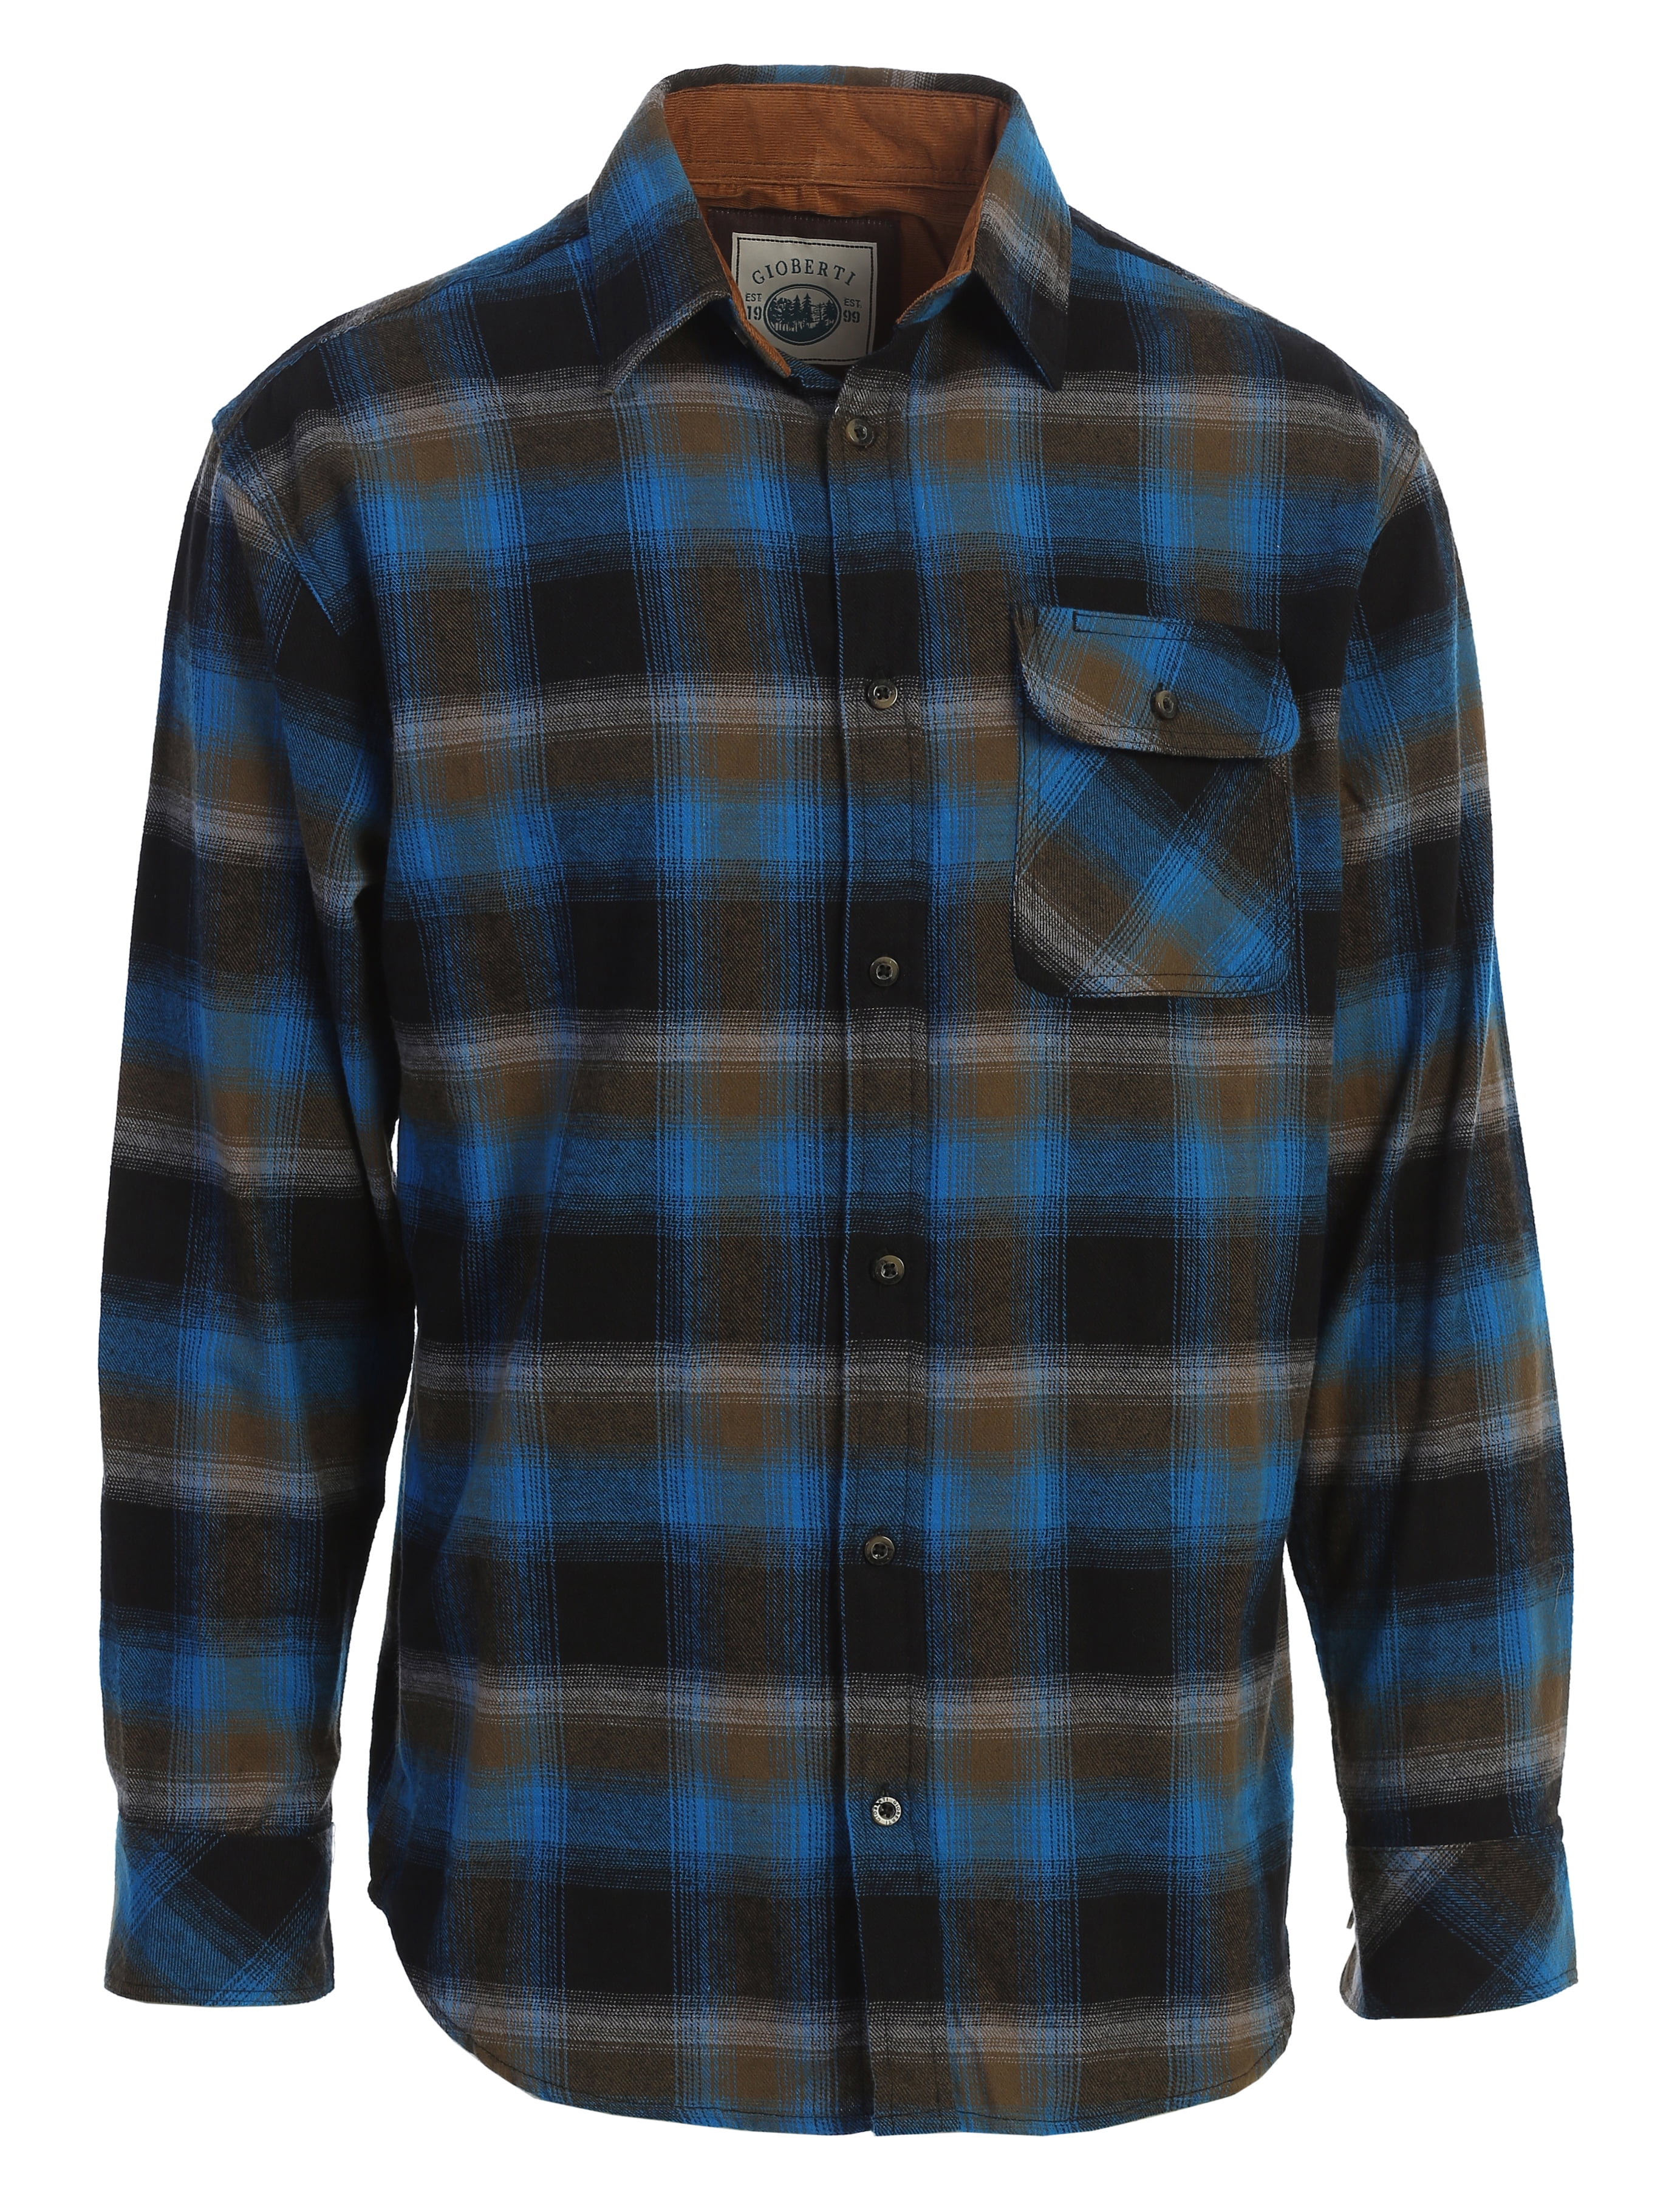 Gioberti Mens Long Sleeve Brushed Flannel Plaid Checkered Shirt with Corduroy Contrast